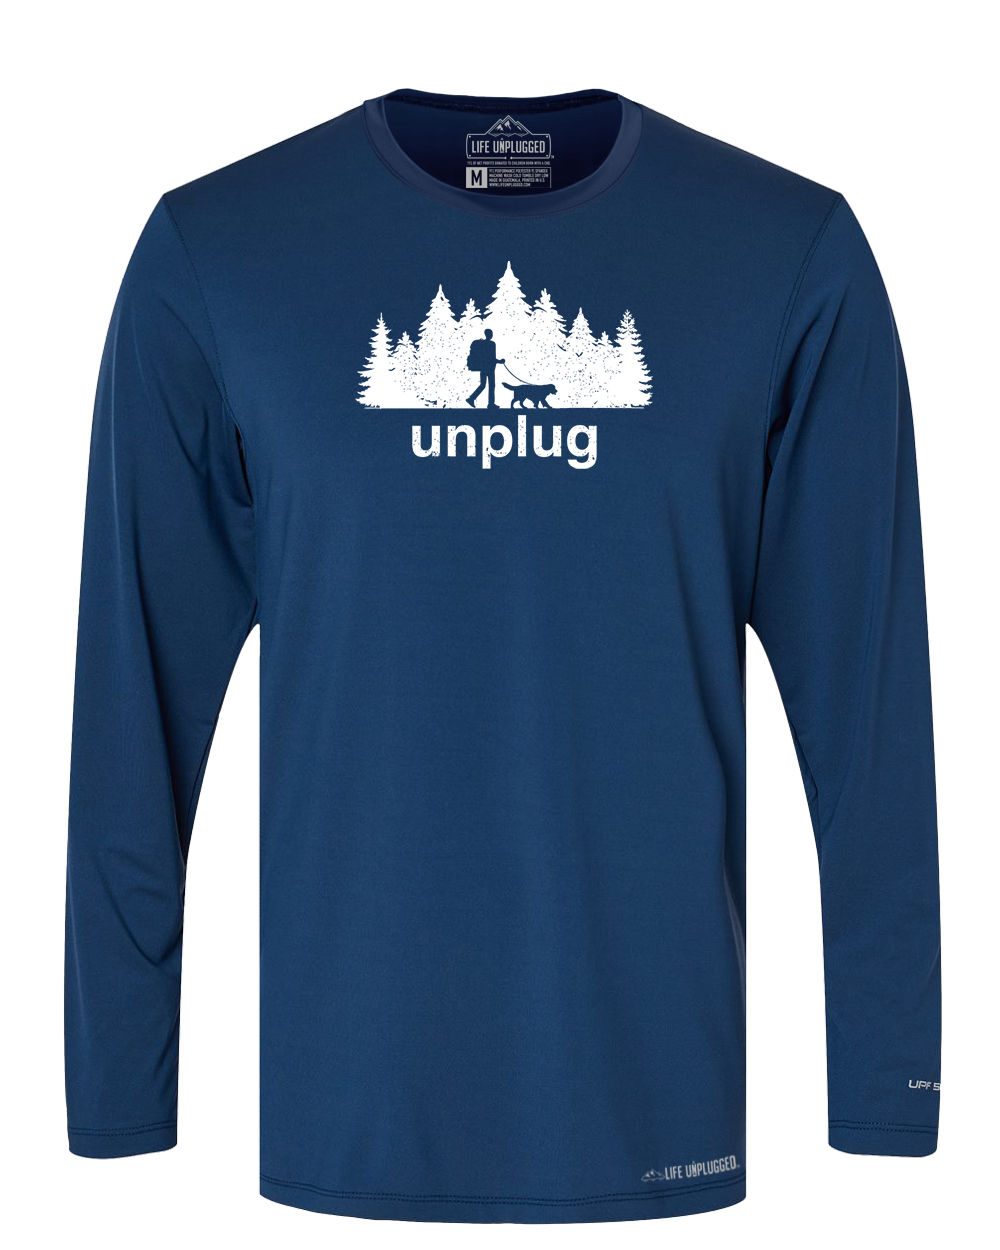 Dog Walks in the Woods Poly/Spandex High Performance Long Sleeve with UPF 50+ - Life Unplugged